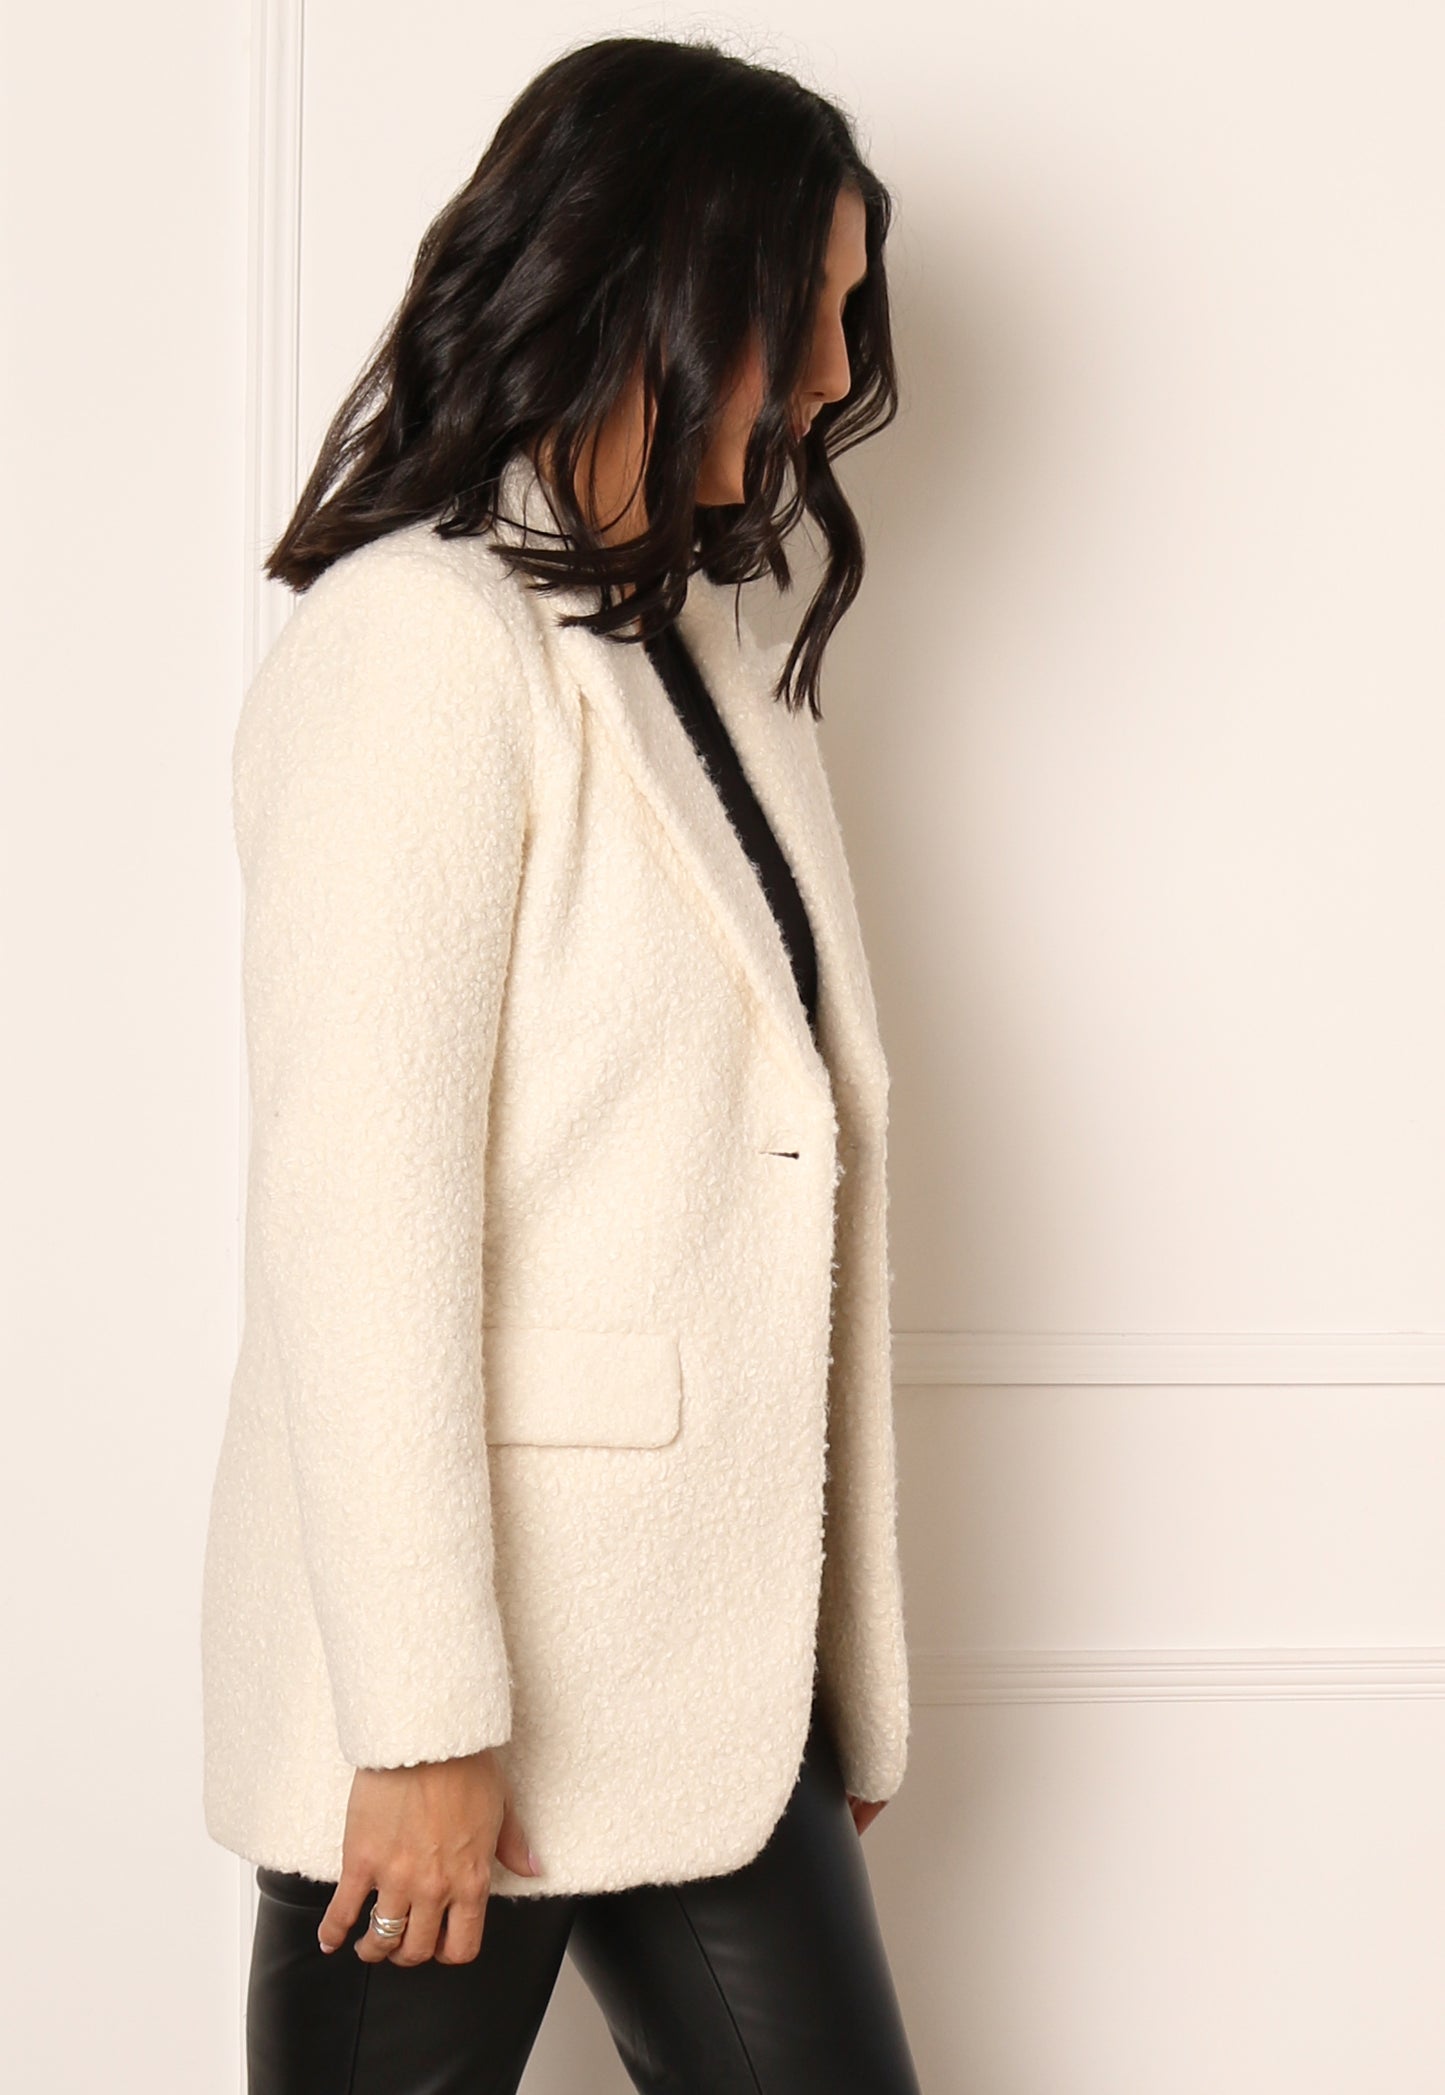 
                  
                    ONLY Piper Single Breasted Boucle Wool Style Blazer Jacket in Soft Cream - One Nation Clothing
                  
                